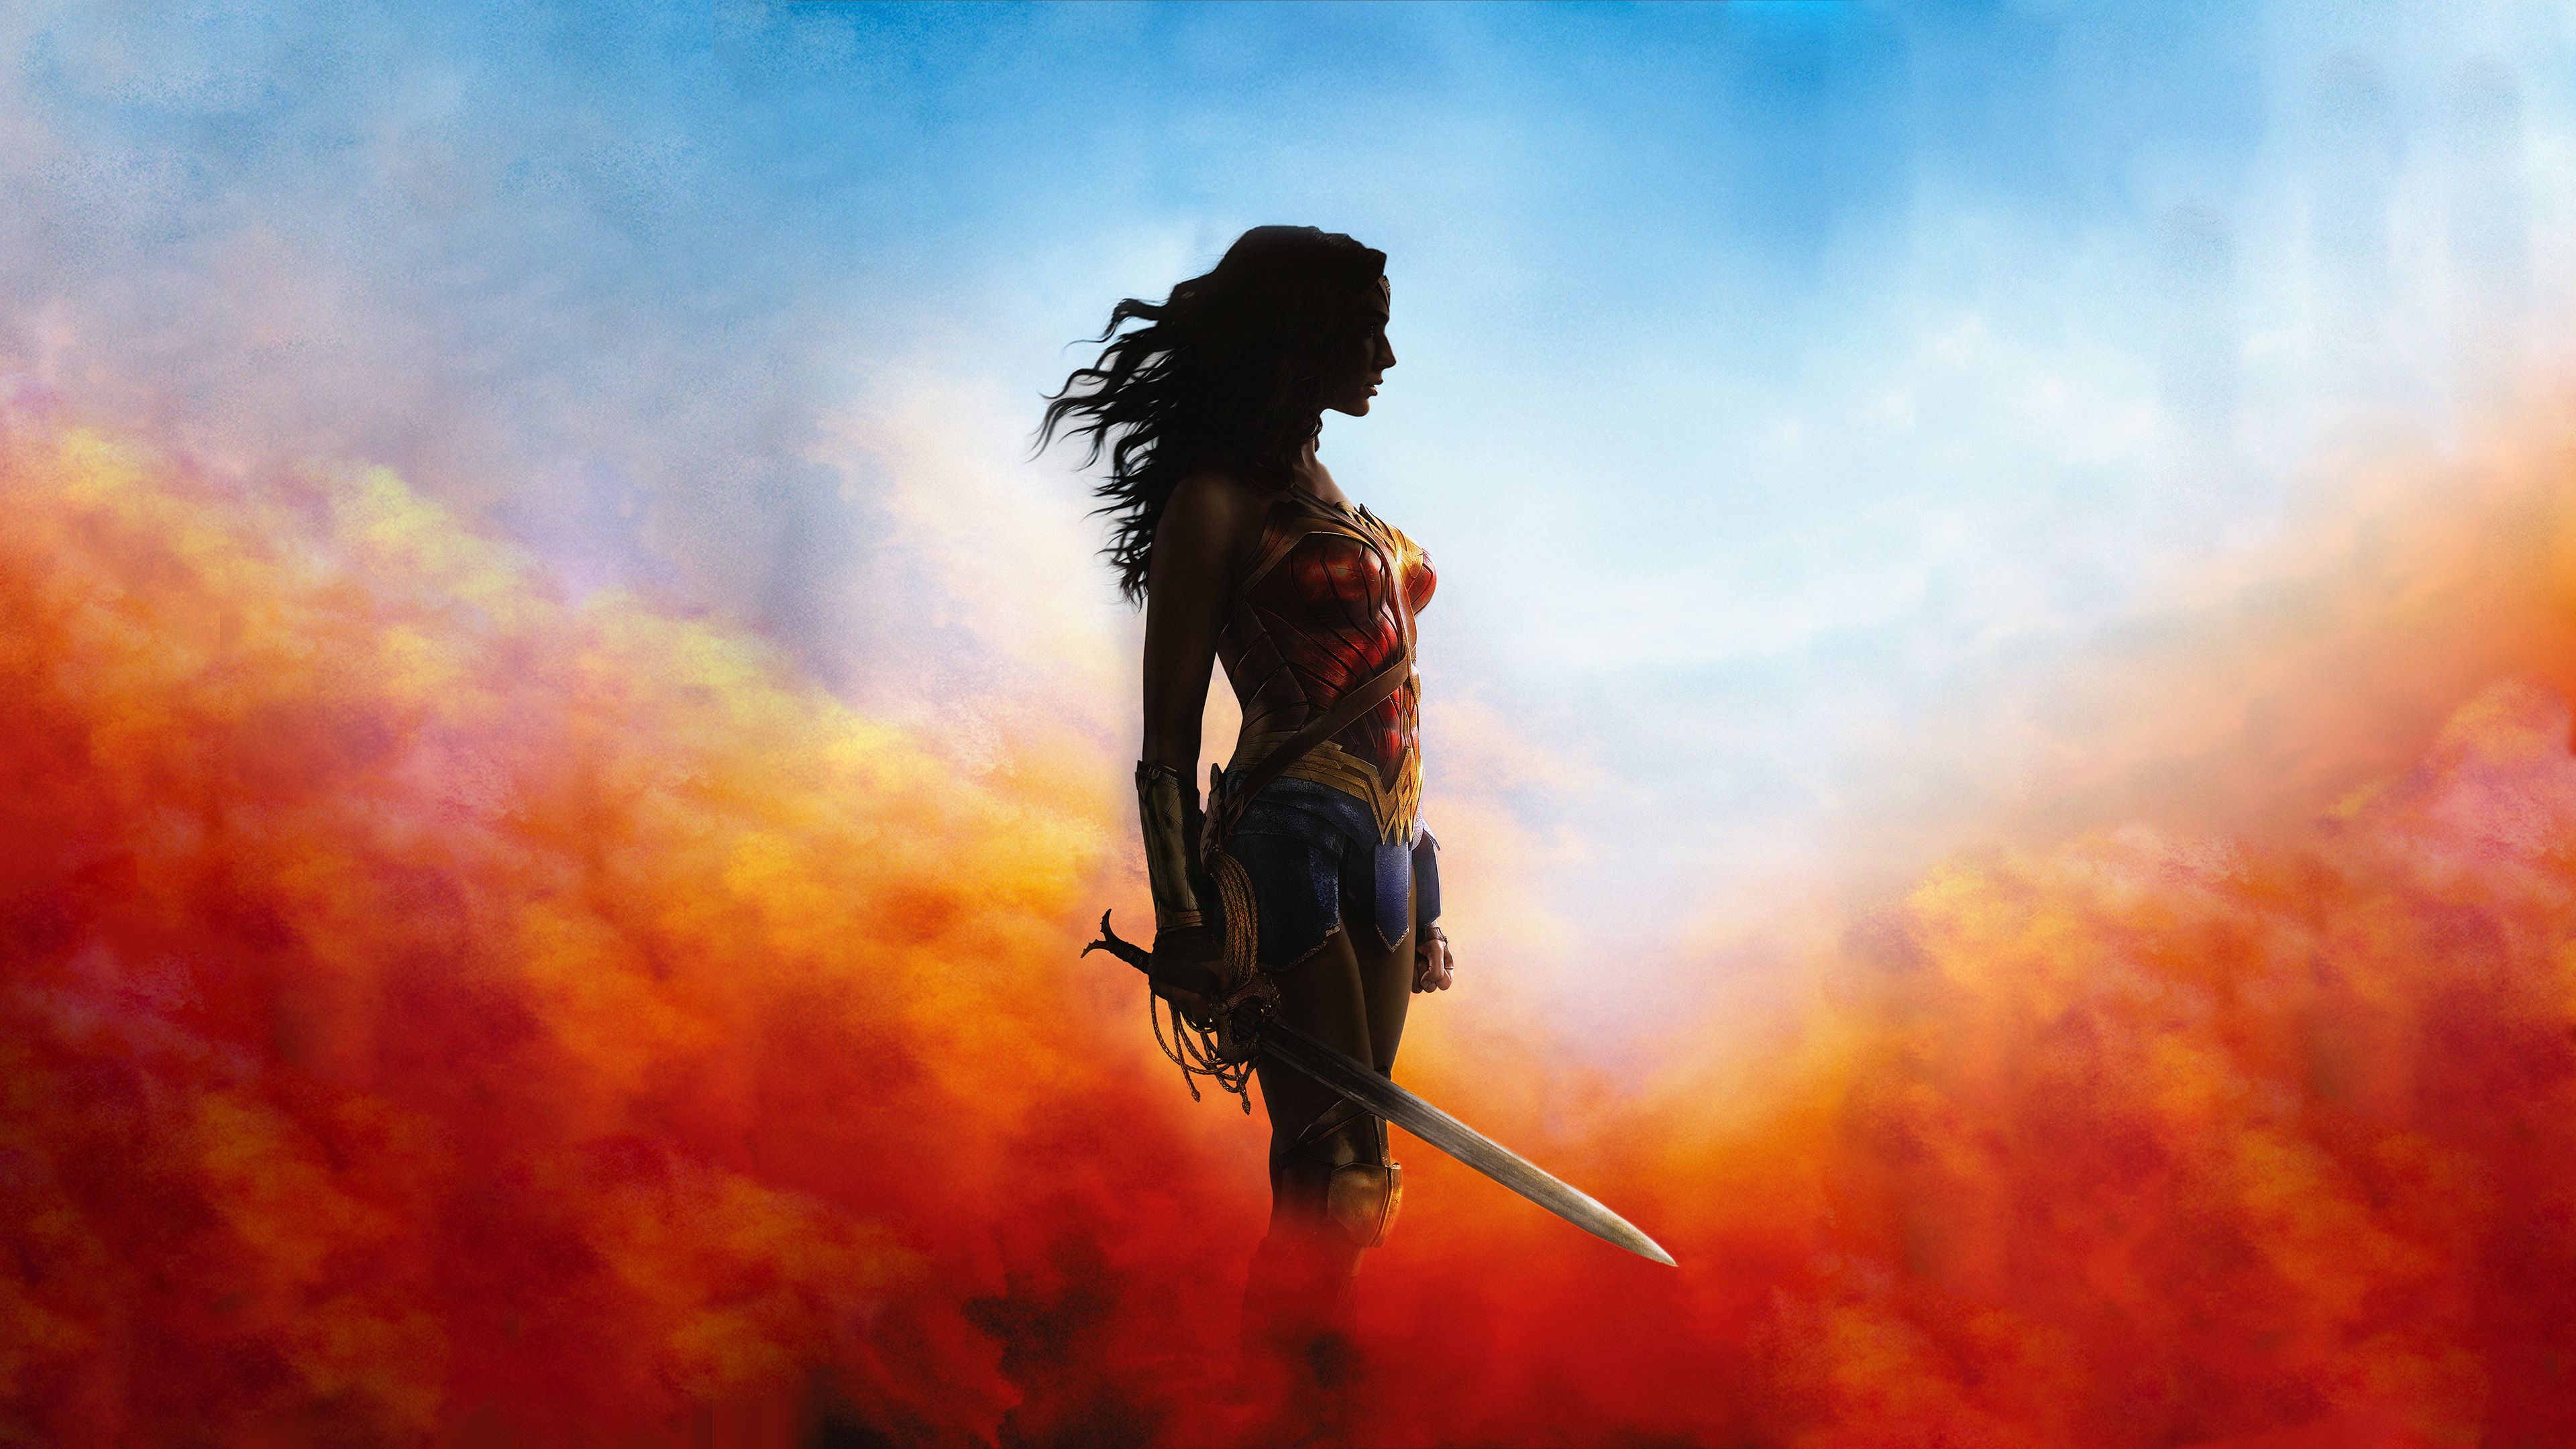 4k Wonder Woman 2018 1080P Resolution HD 4k Wallpaper, Image, Background, Photo and Picture